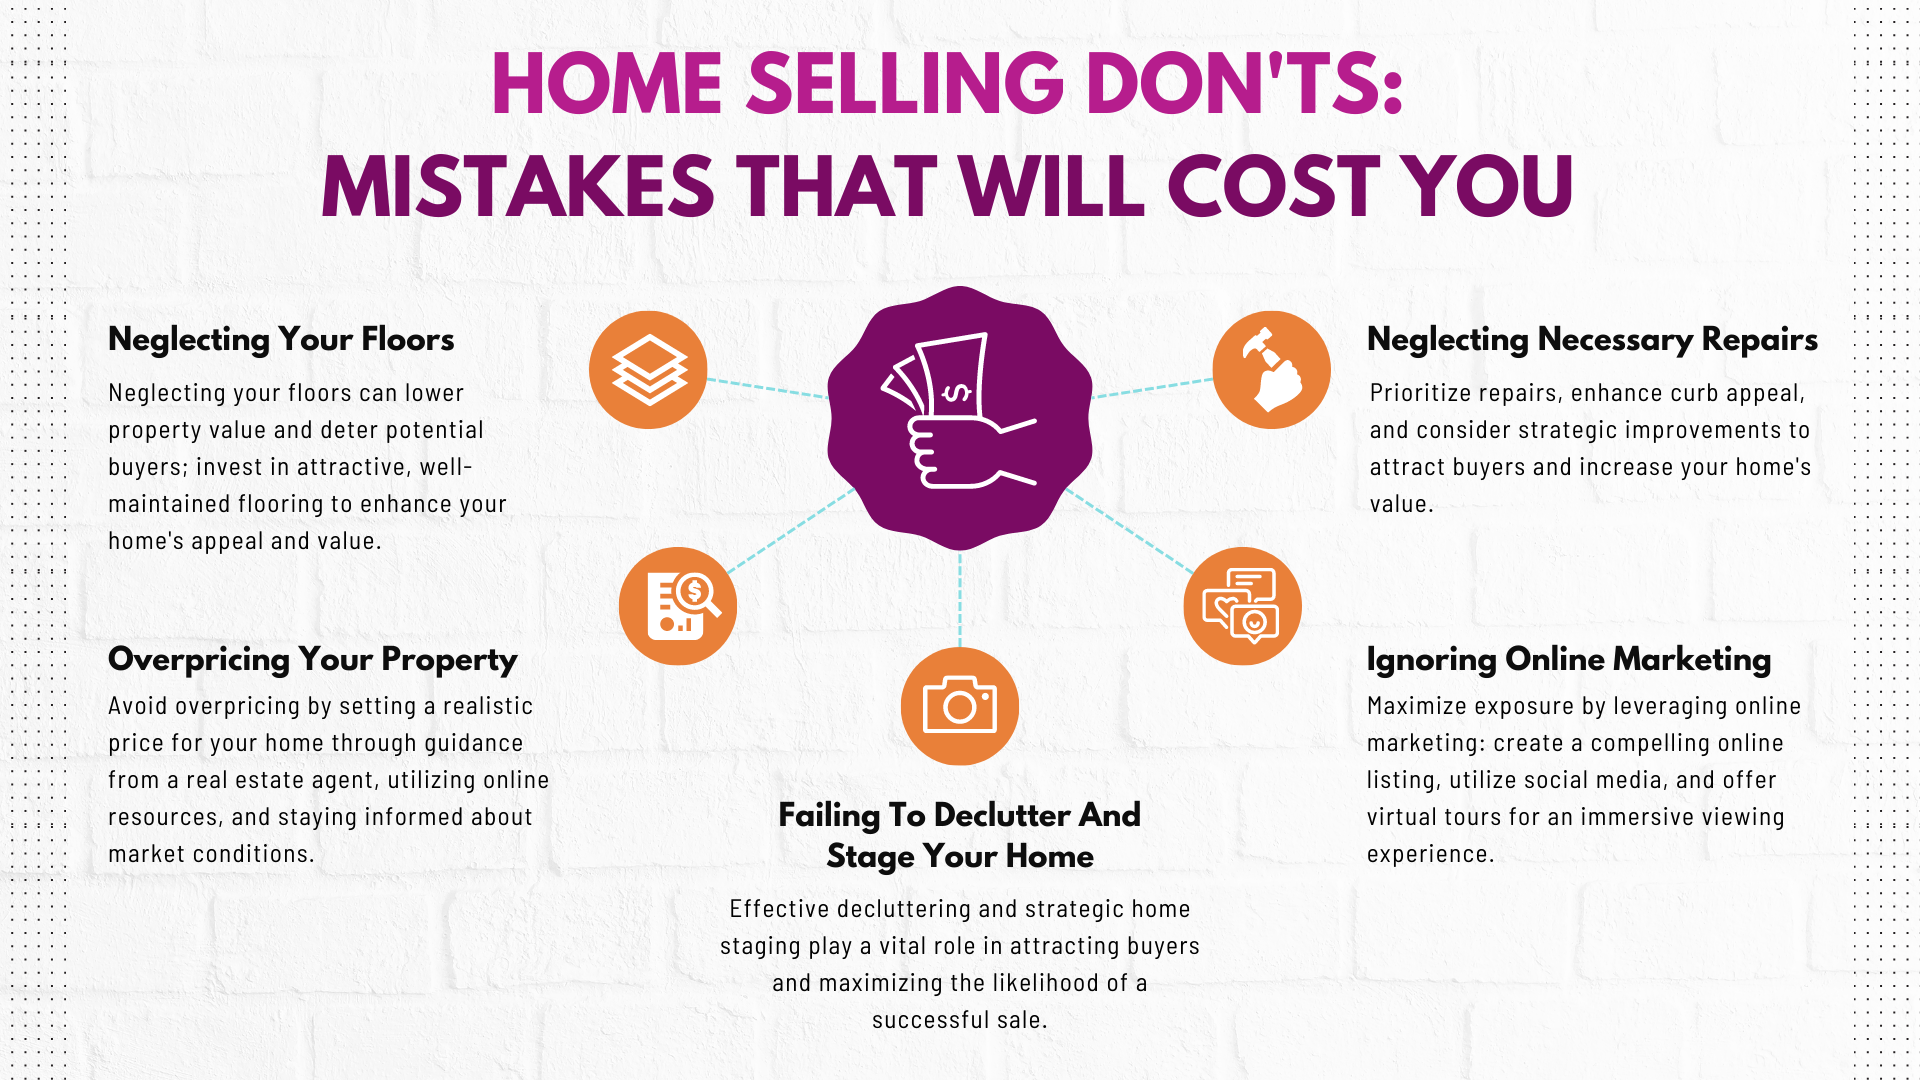 Home Selling Don'ts 5 Costly Mistakes To Avoid - Floorily